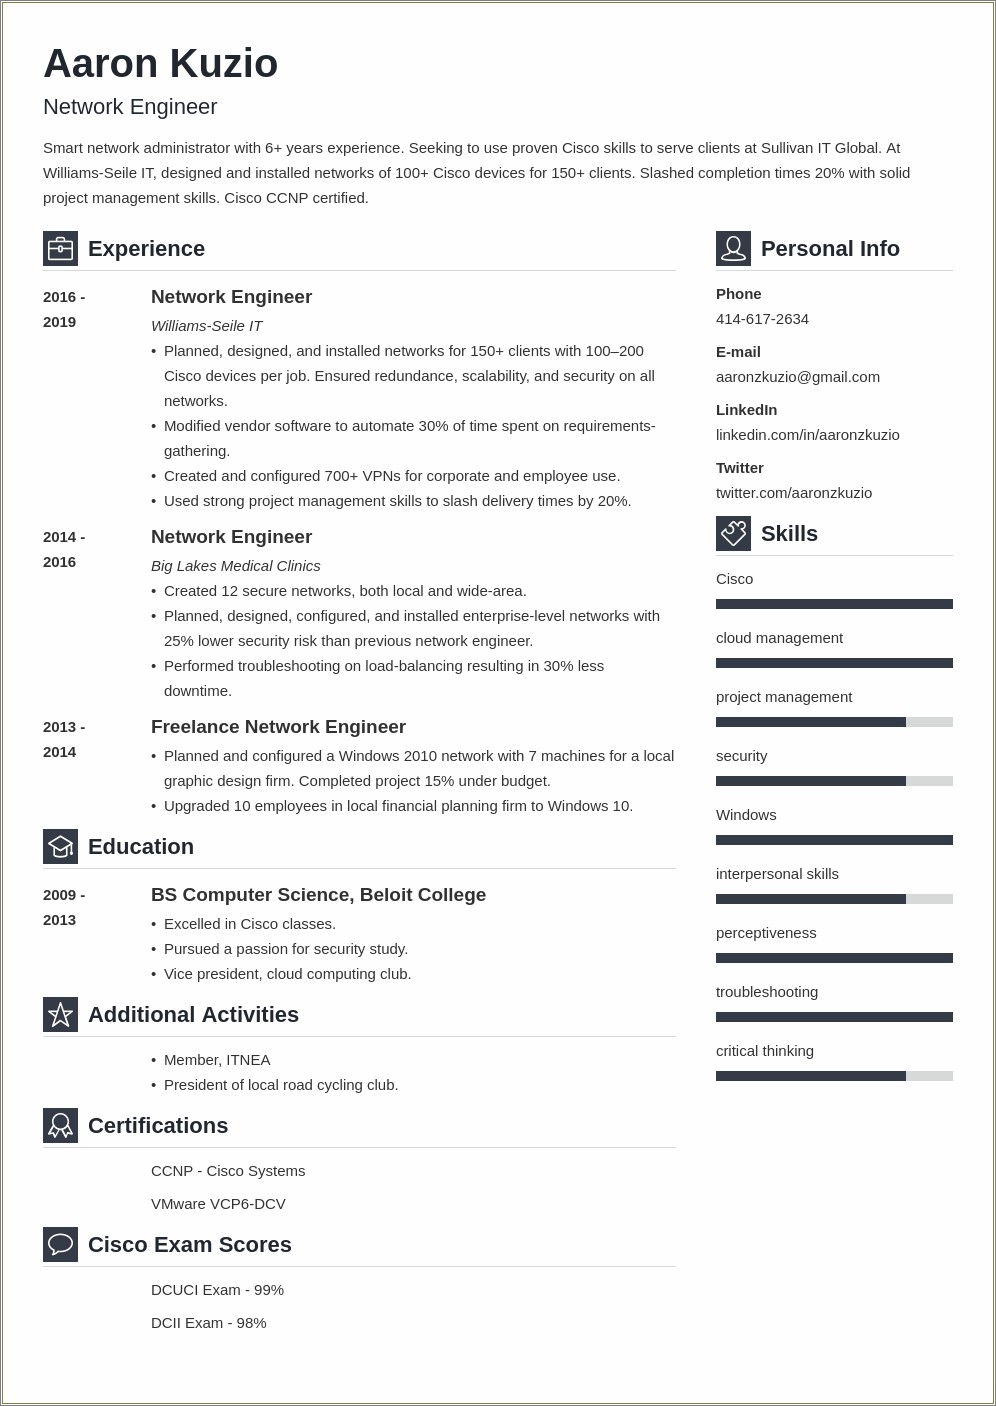 Sample Resume With Microsoft Certification Logo